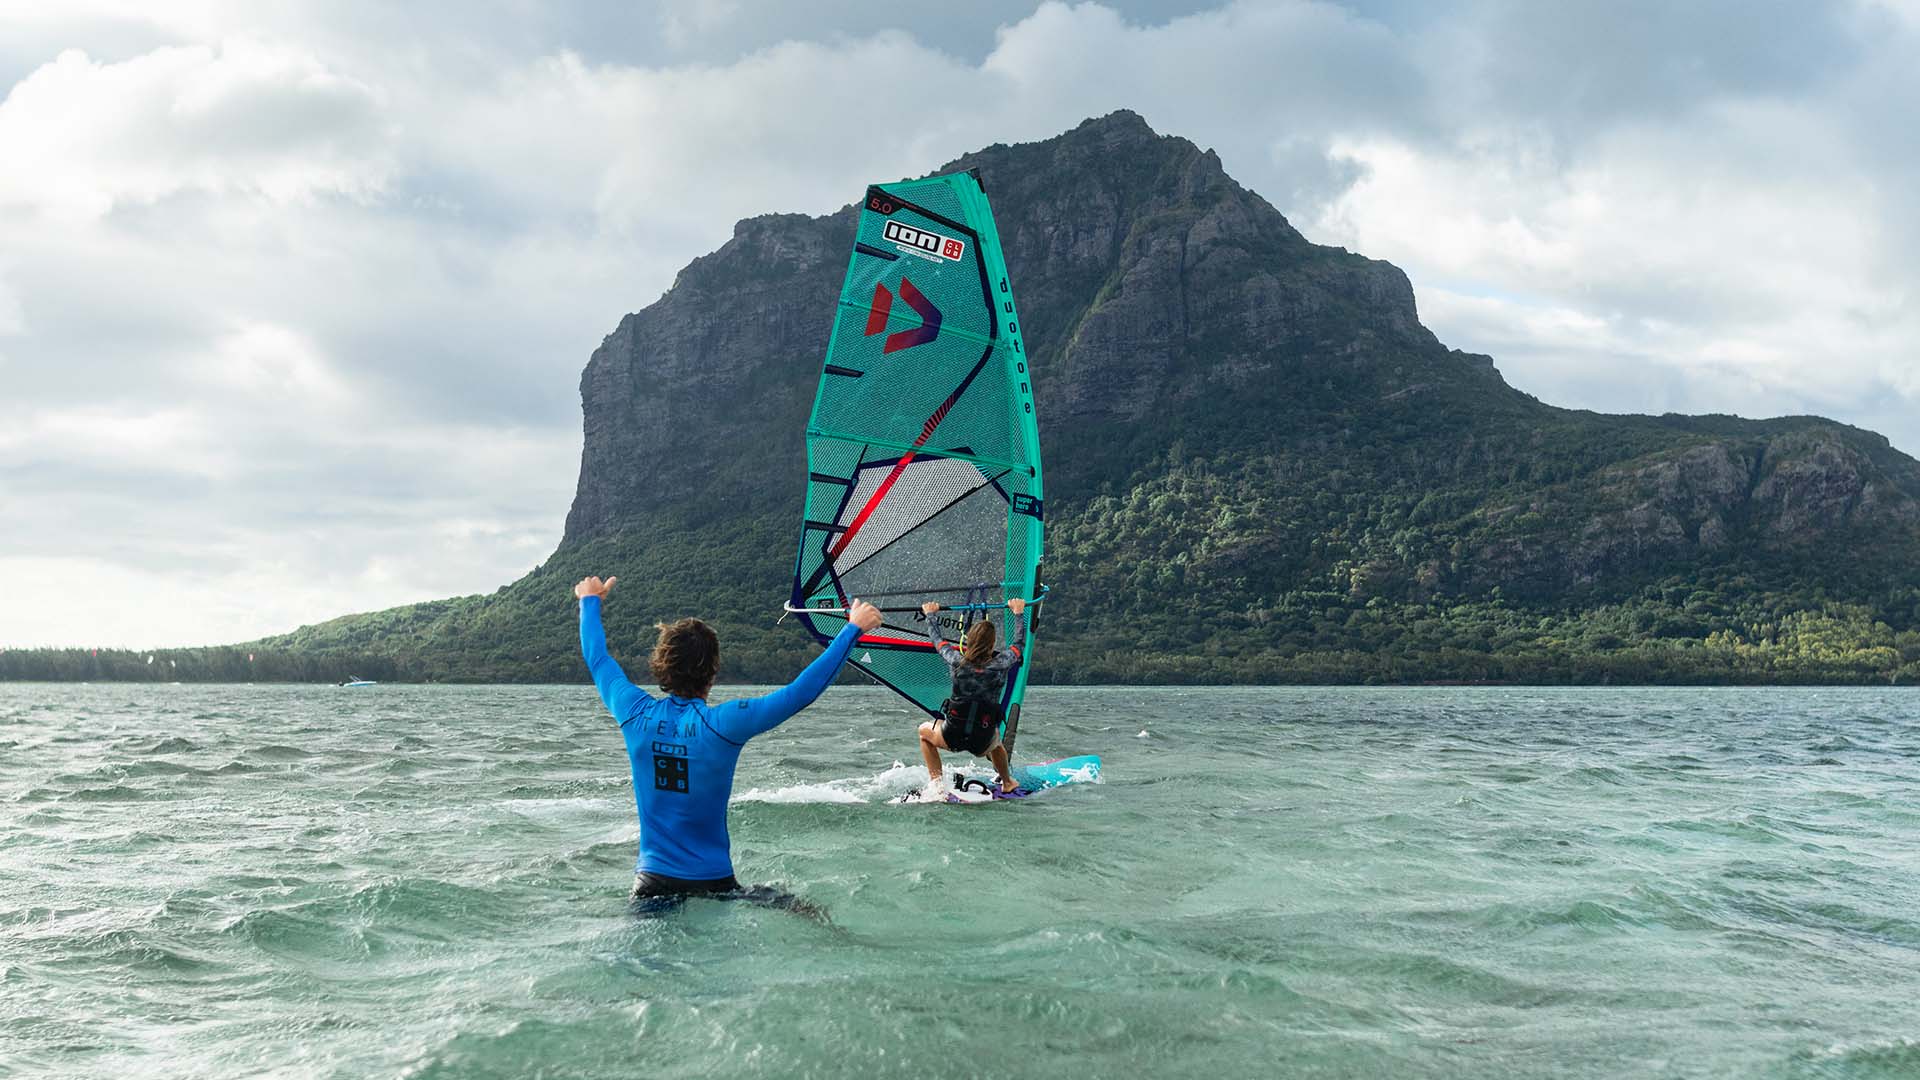 windsurf lessons in crystal clear water